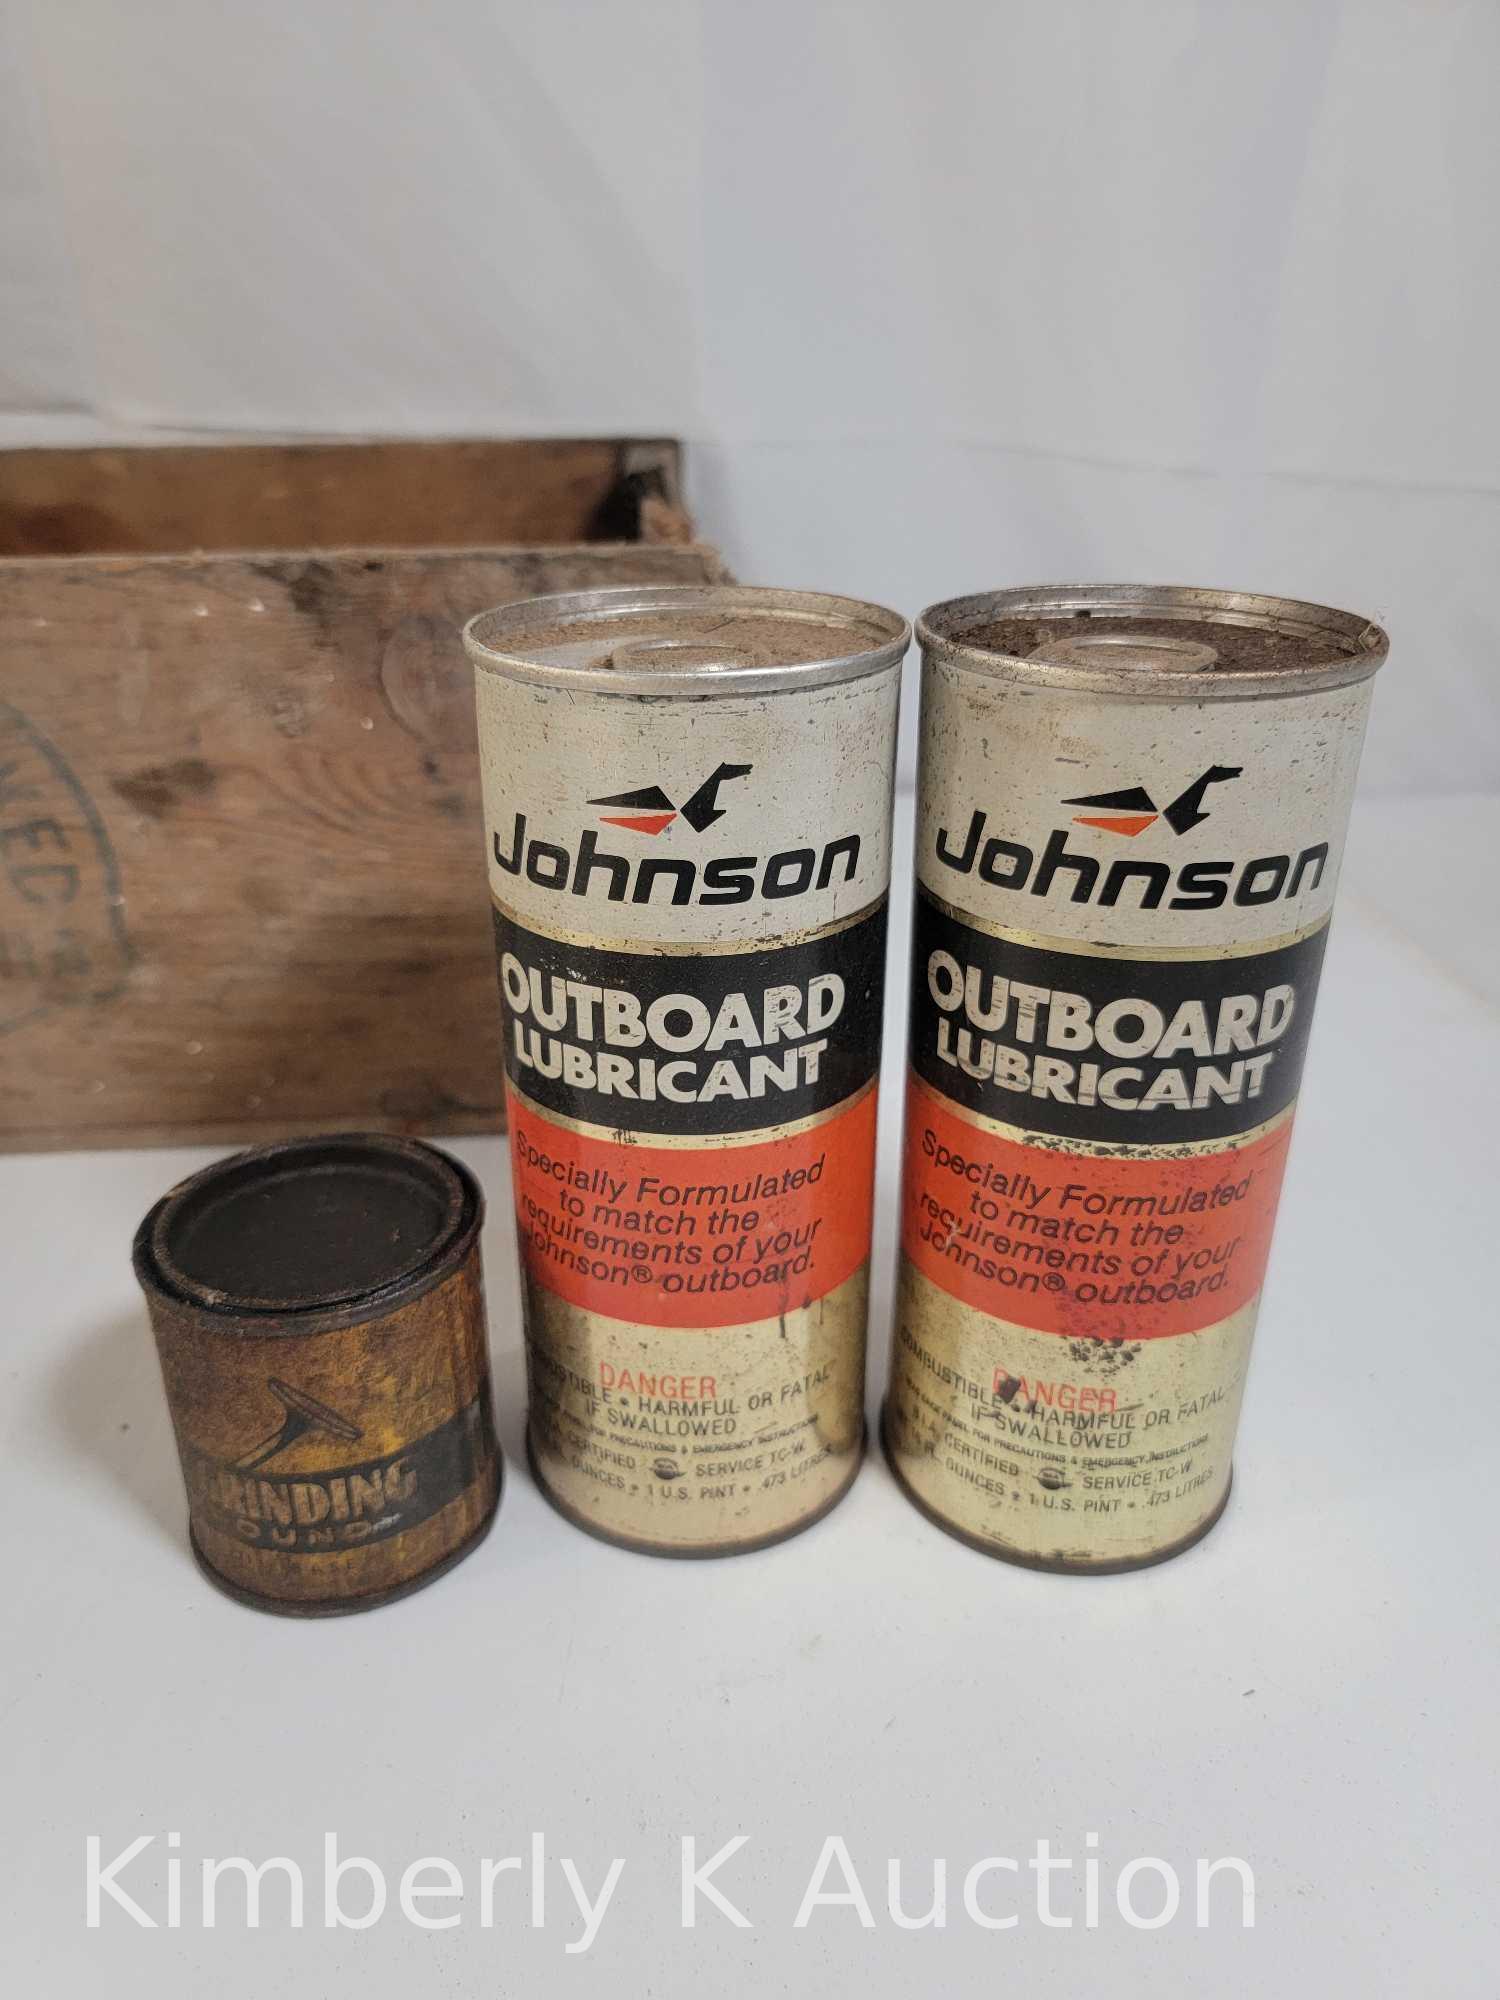 Vintage Advertising, Containers: Anti-Icer, Degreaser, Brake Fluid, Lubricants and Wooden Crate